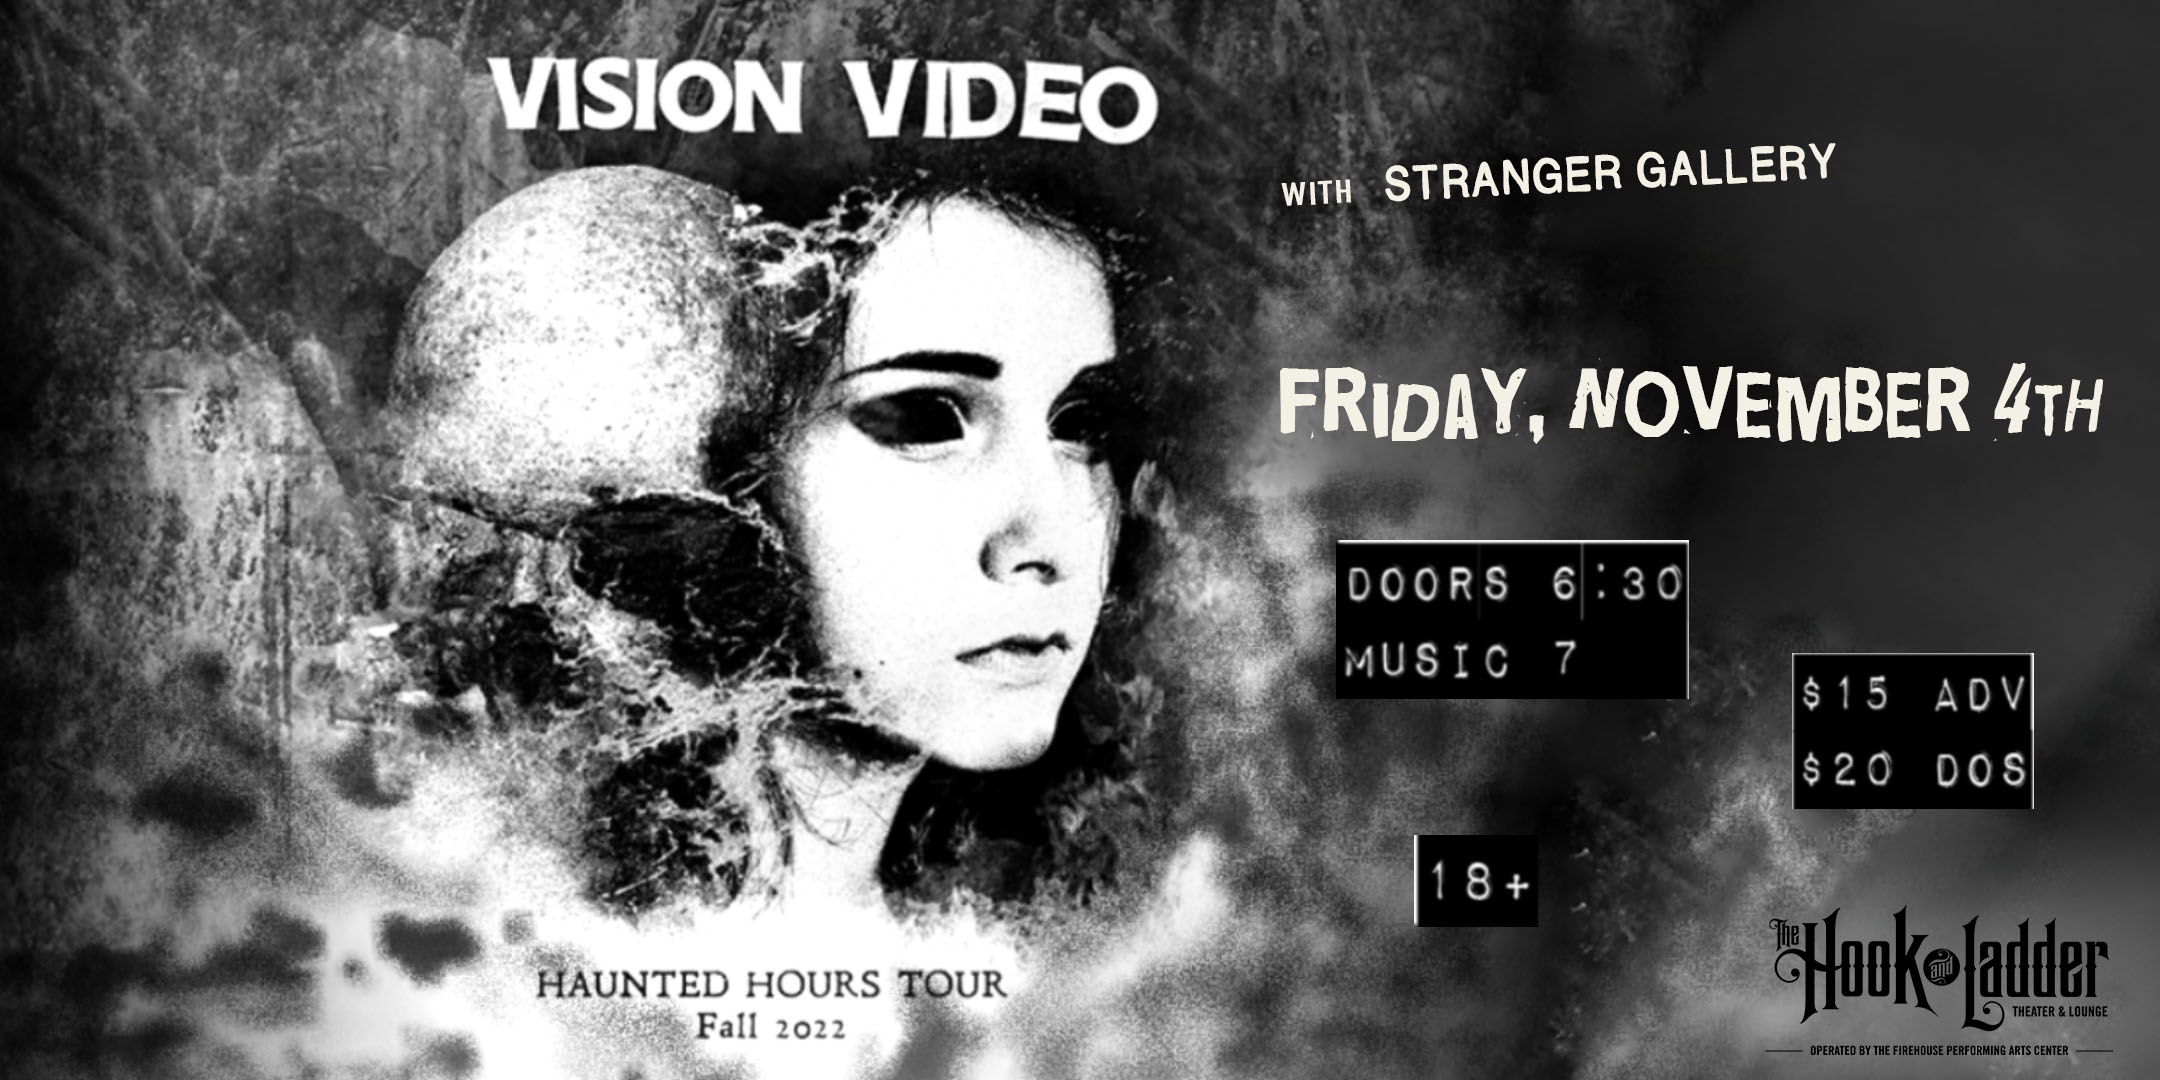 Vision Video with Stranger Gallery Friday November 4 The Hook and Ladder Theater Doors 6:30pm :: Music 7:00pm :: 18+ General Admission * $15 ADV / $20 DOS * Does not include fees